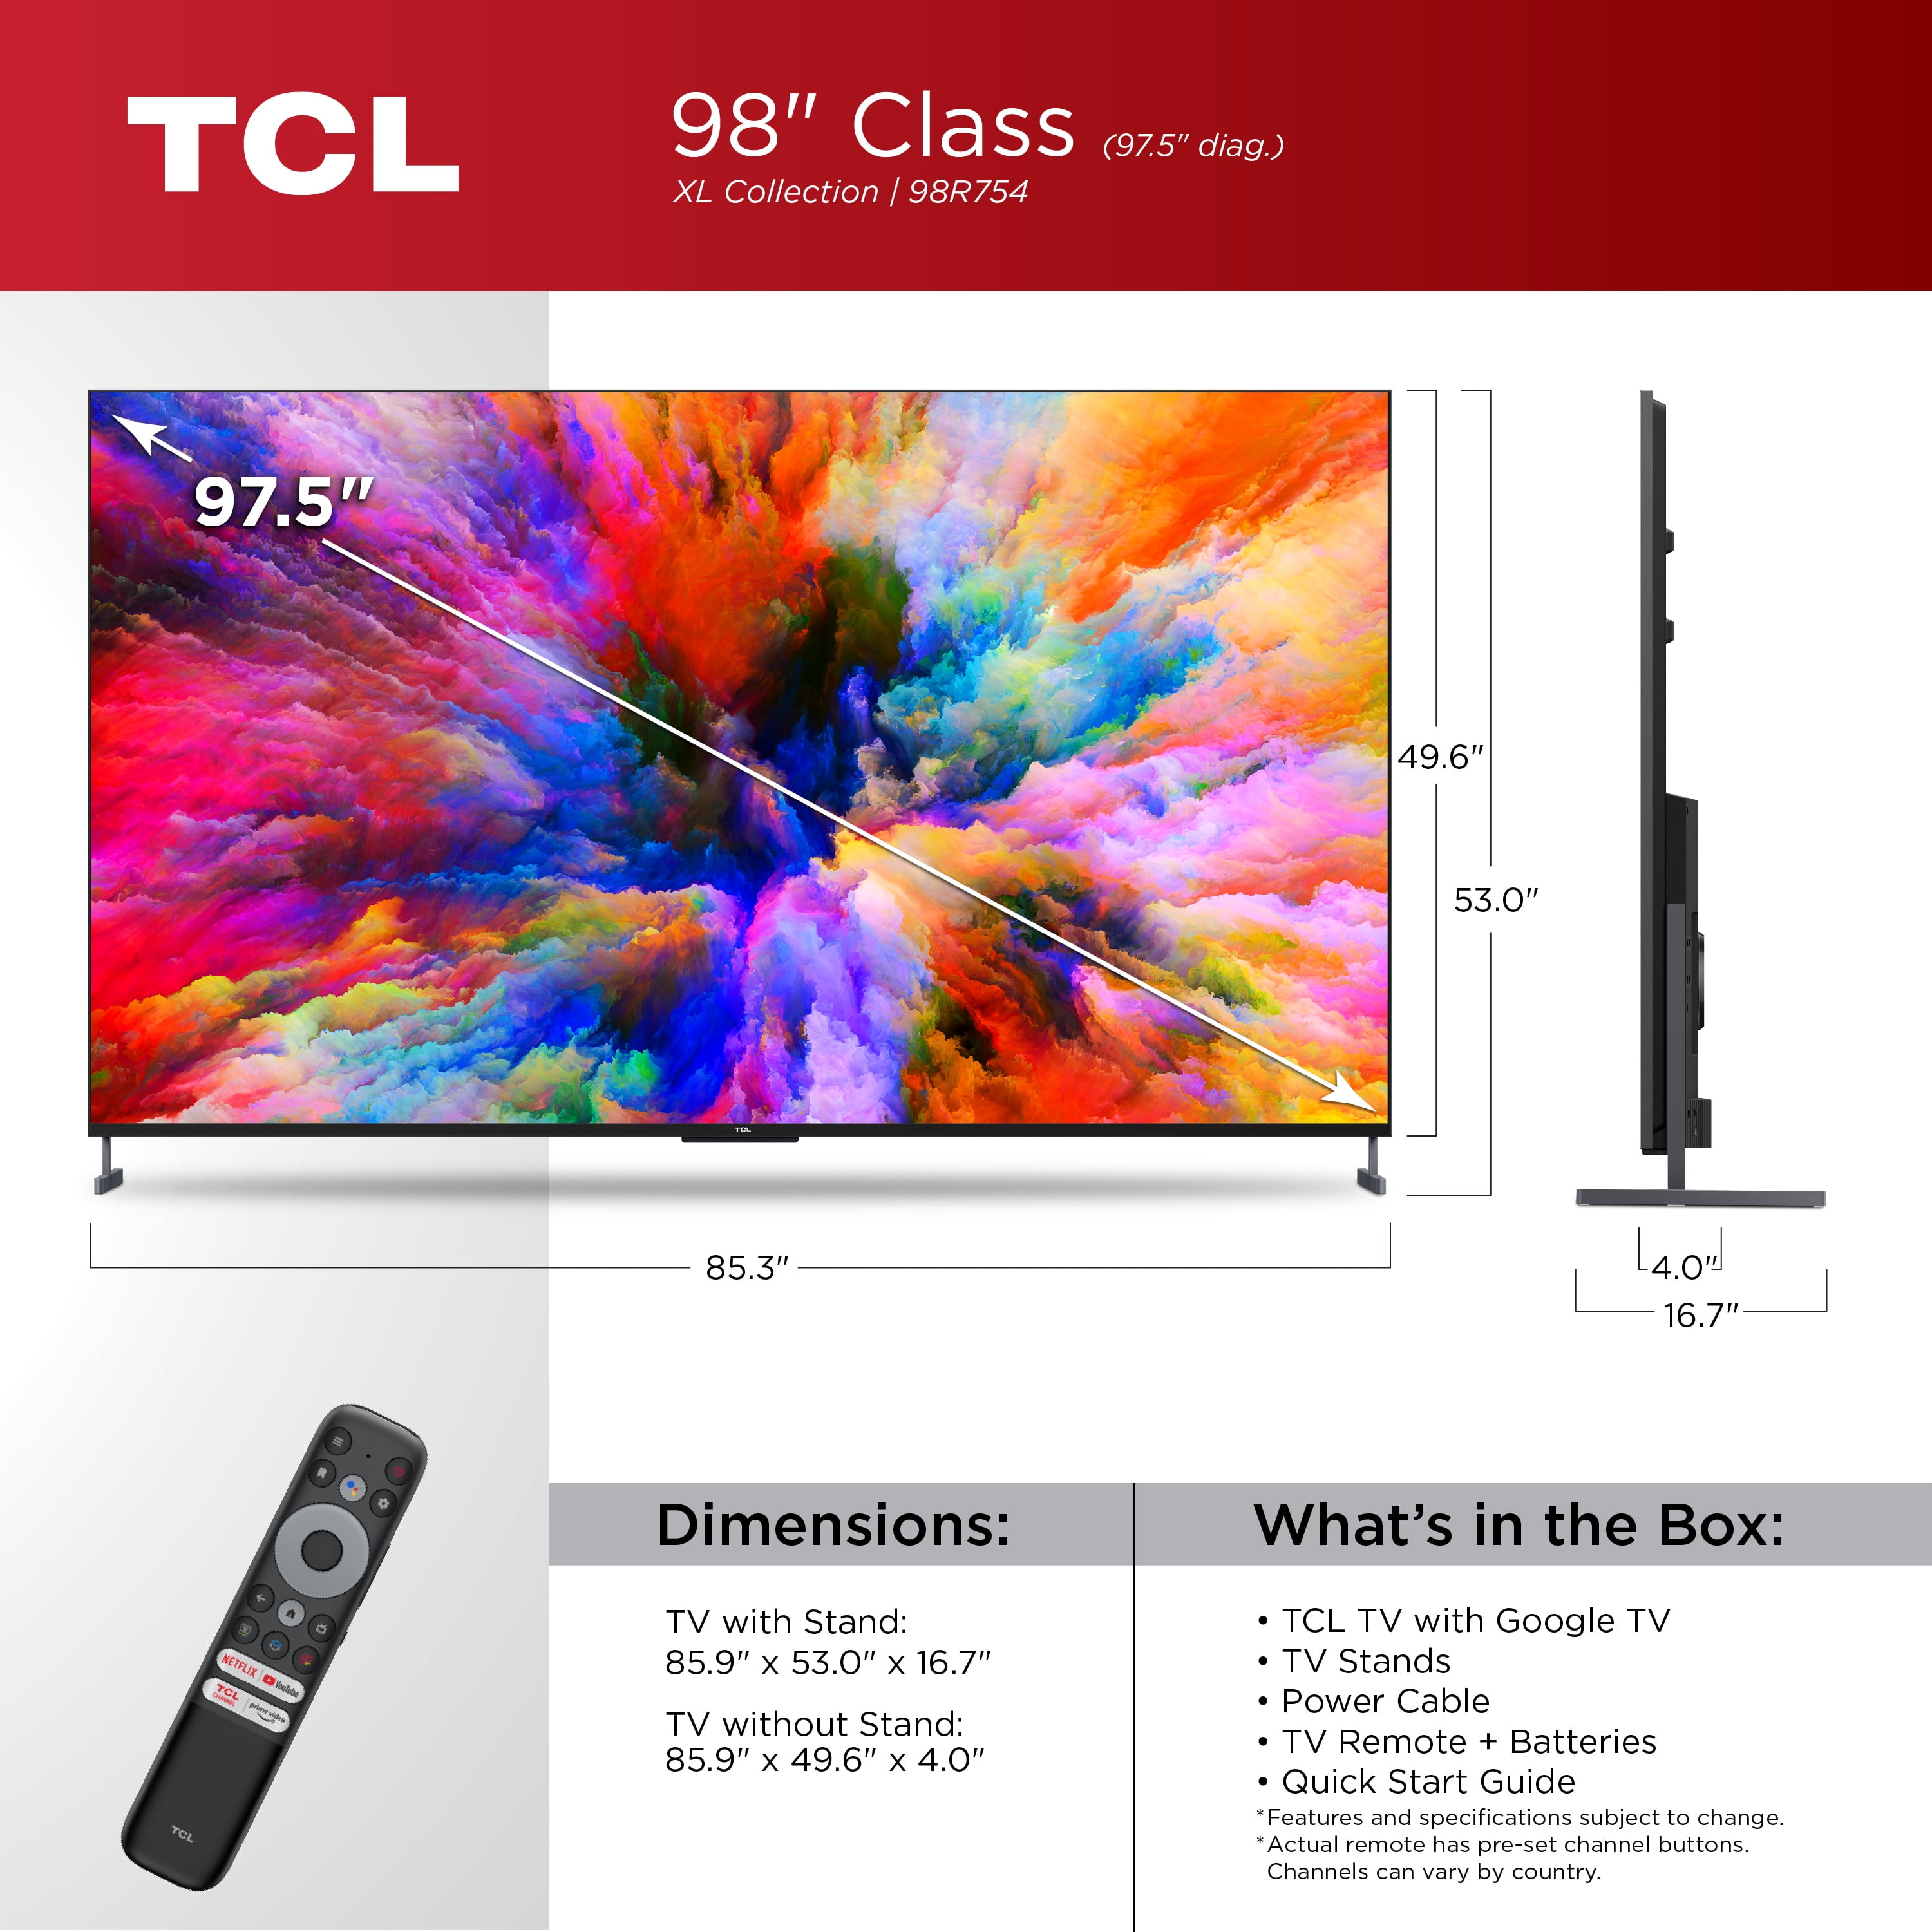 TCL 98 Class XL Collection 4K UHD QLED Dolby Vision HDR Smart Google TV,  98R754